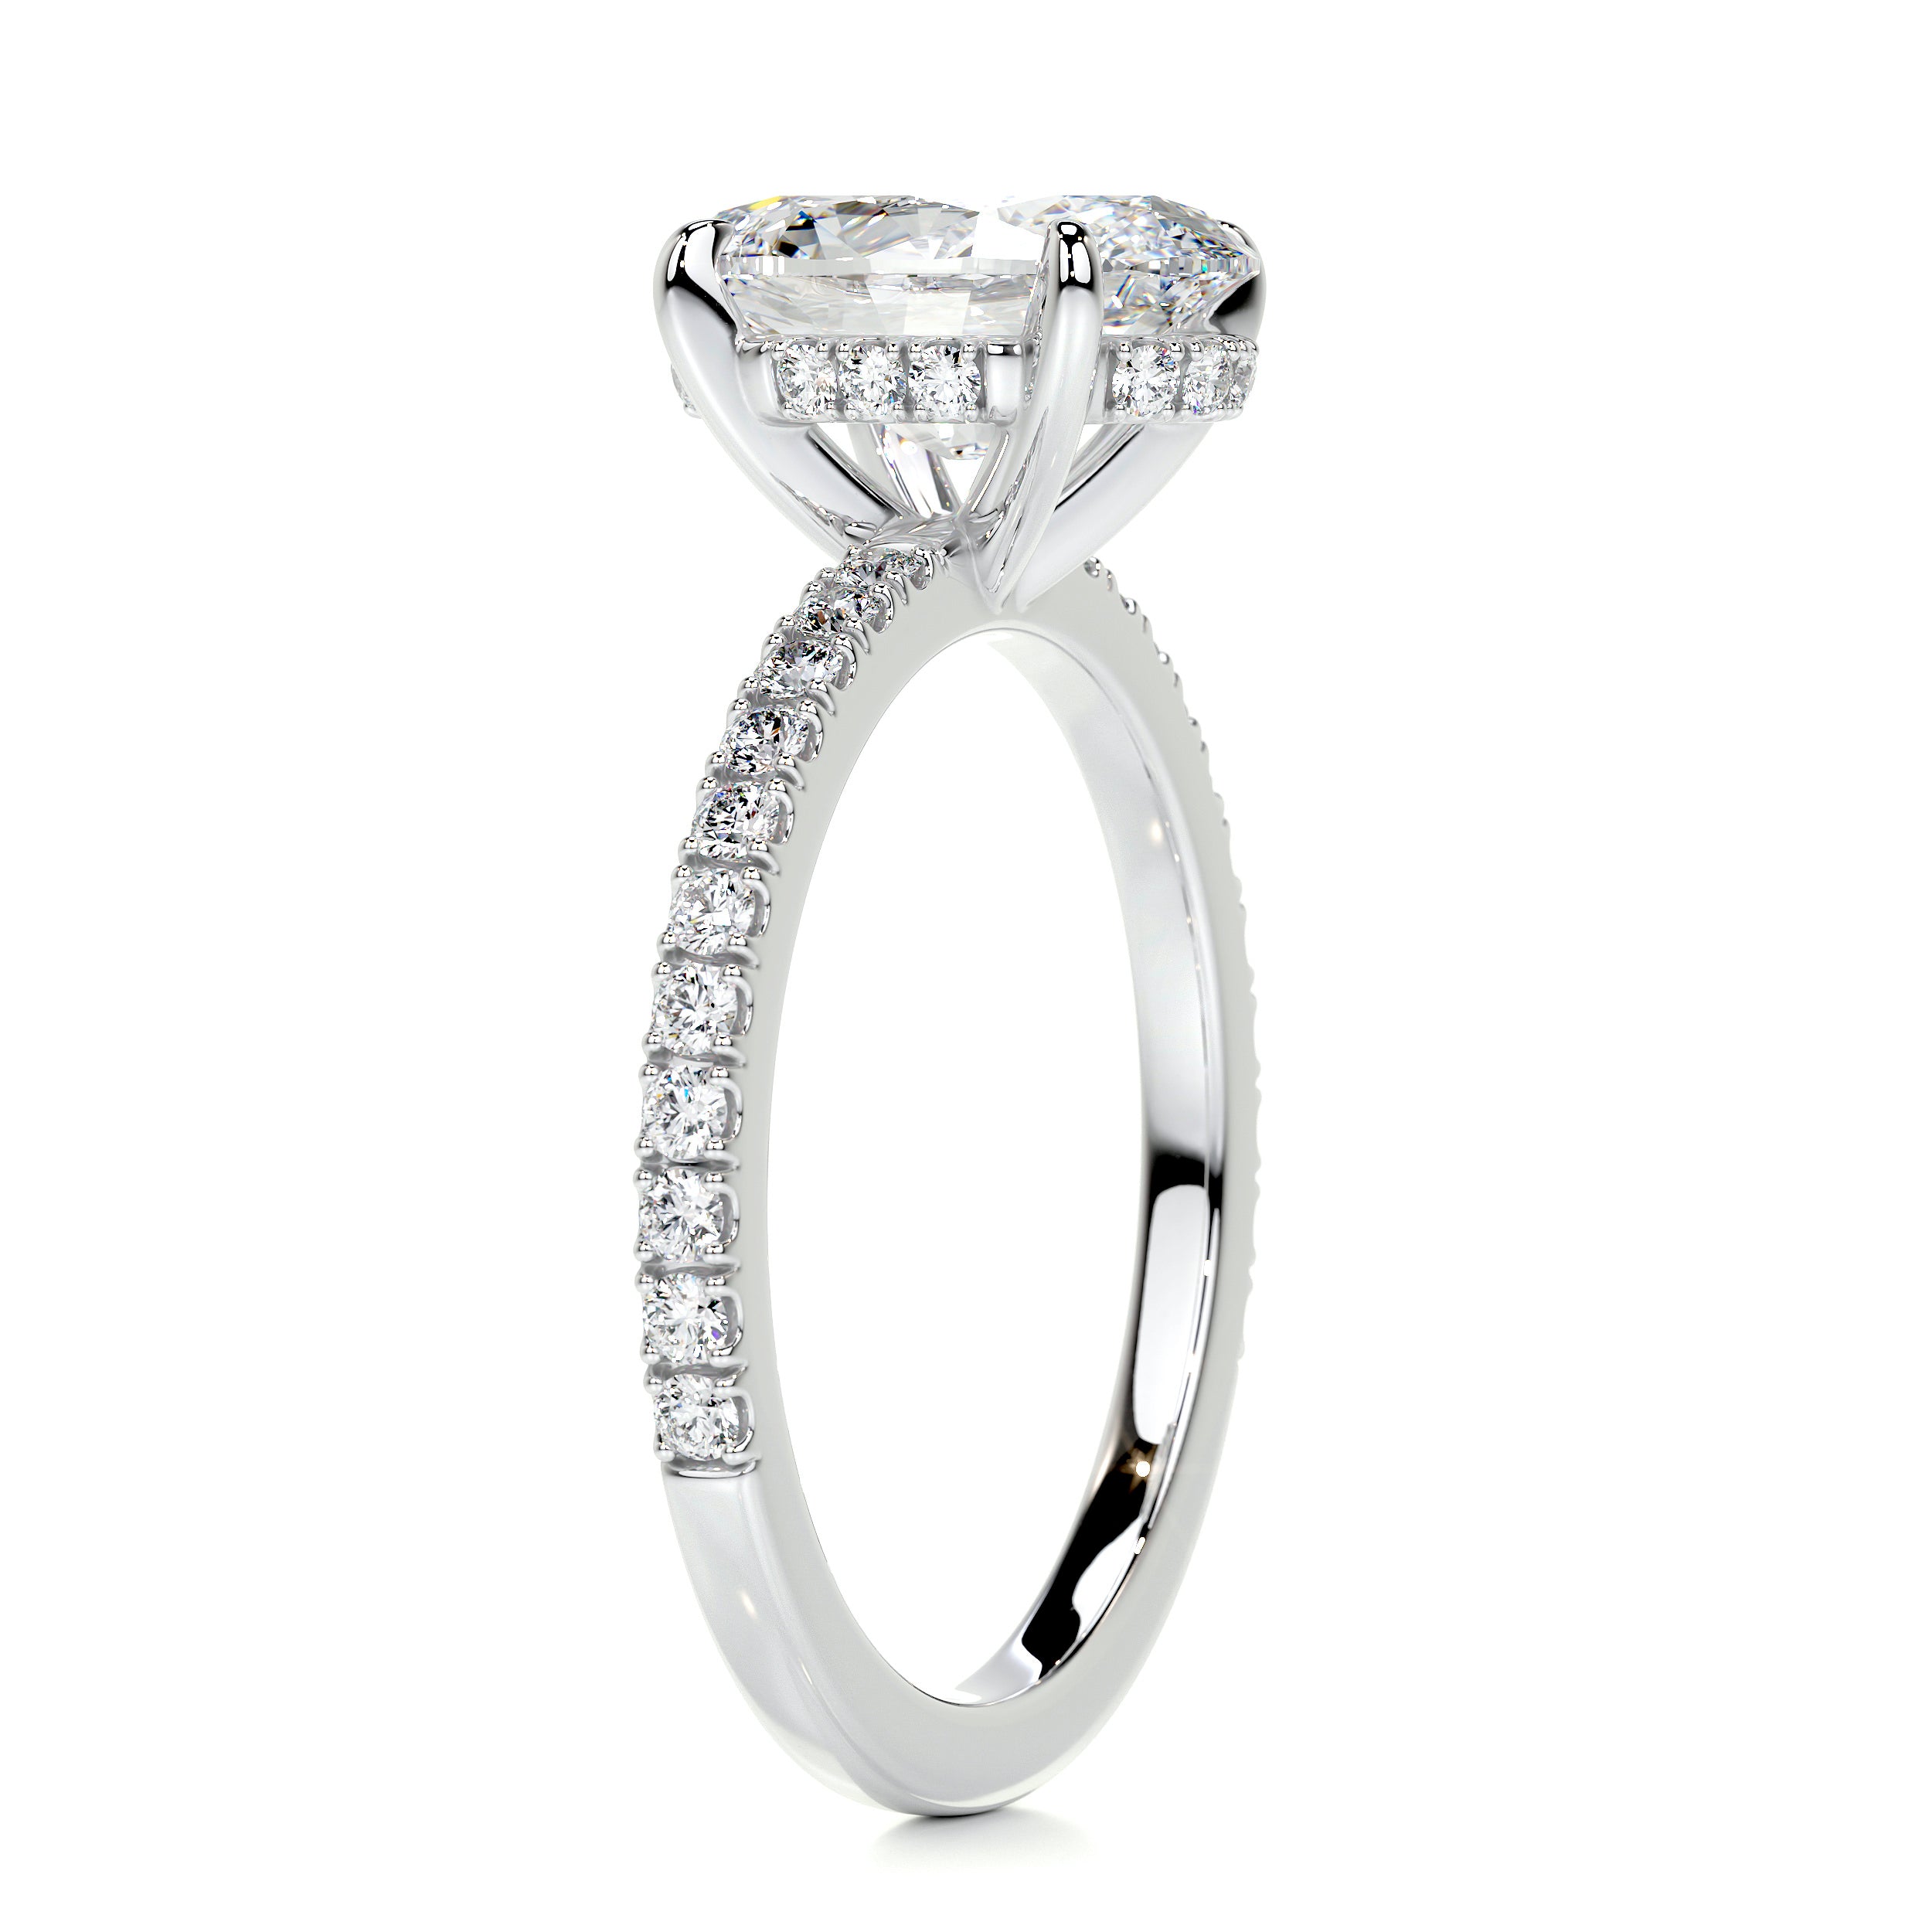 Lucy Diamond Engagement Ring -14K White Gold